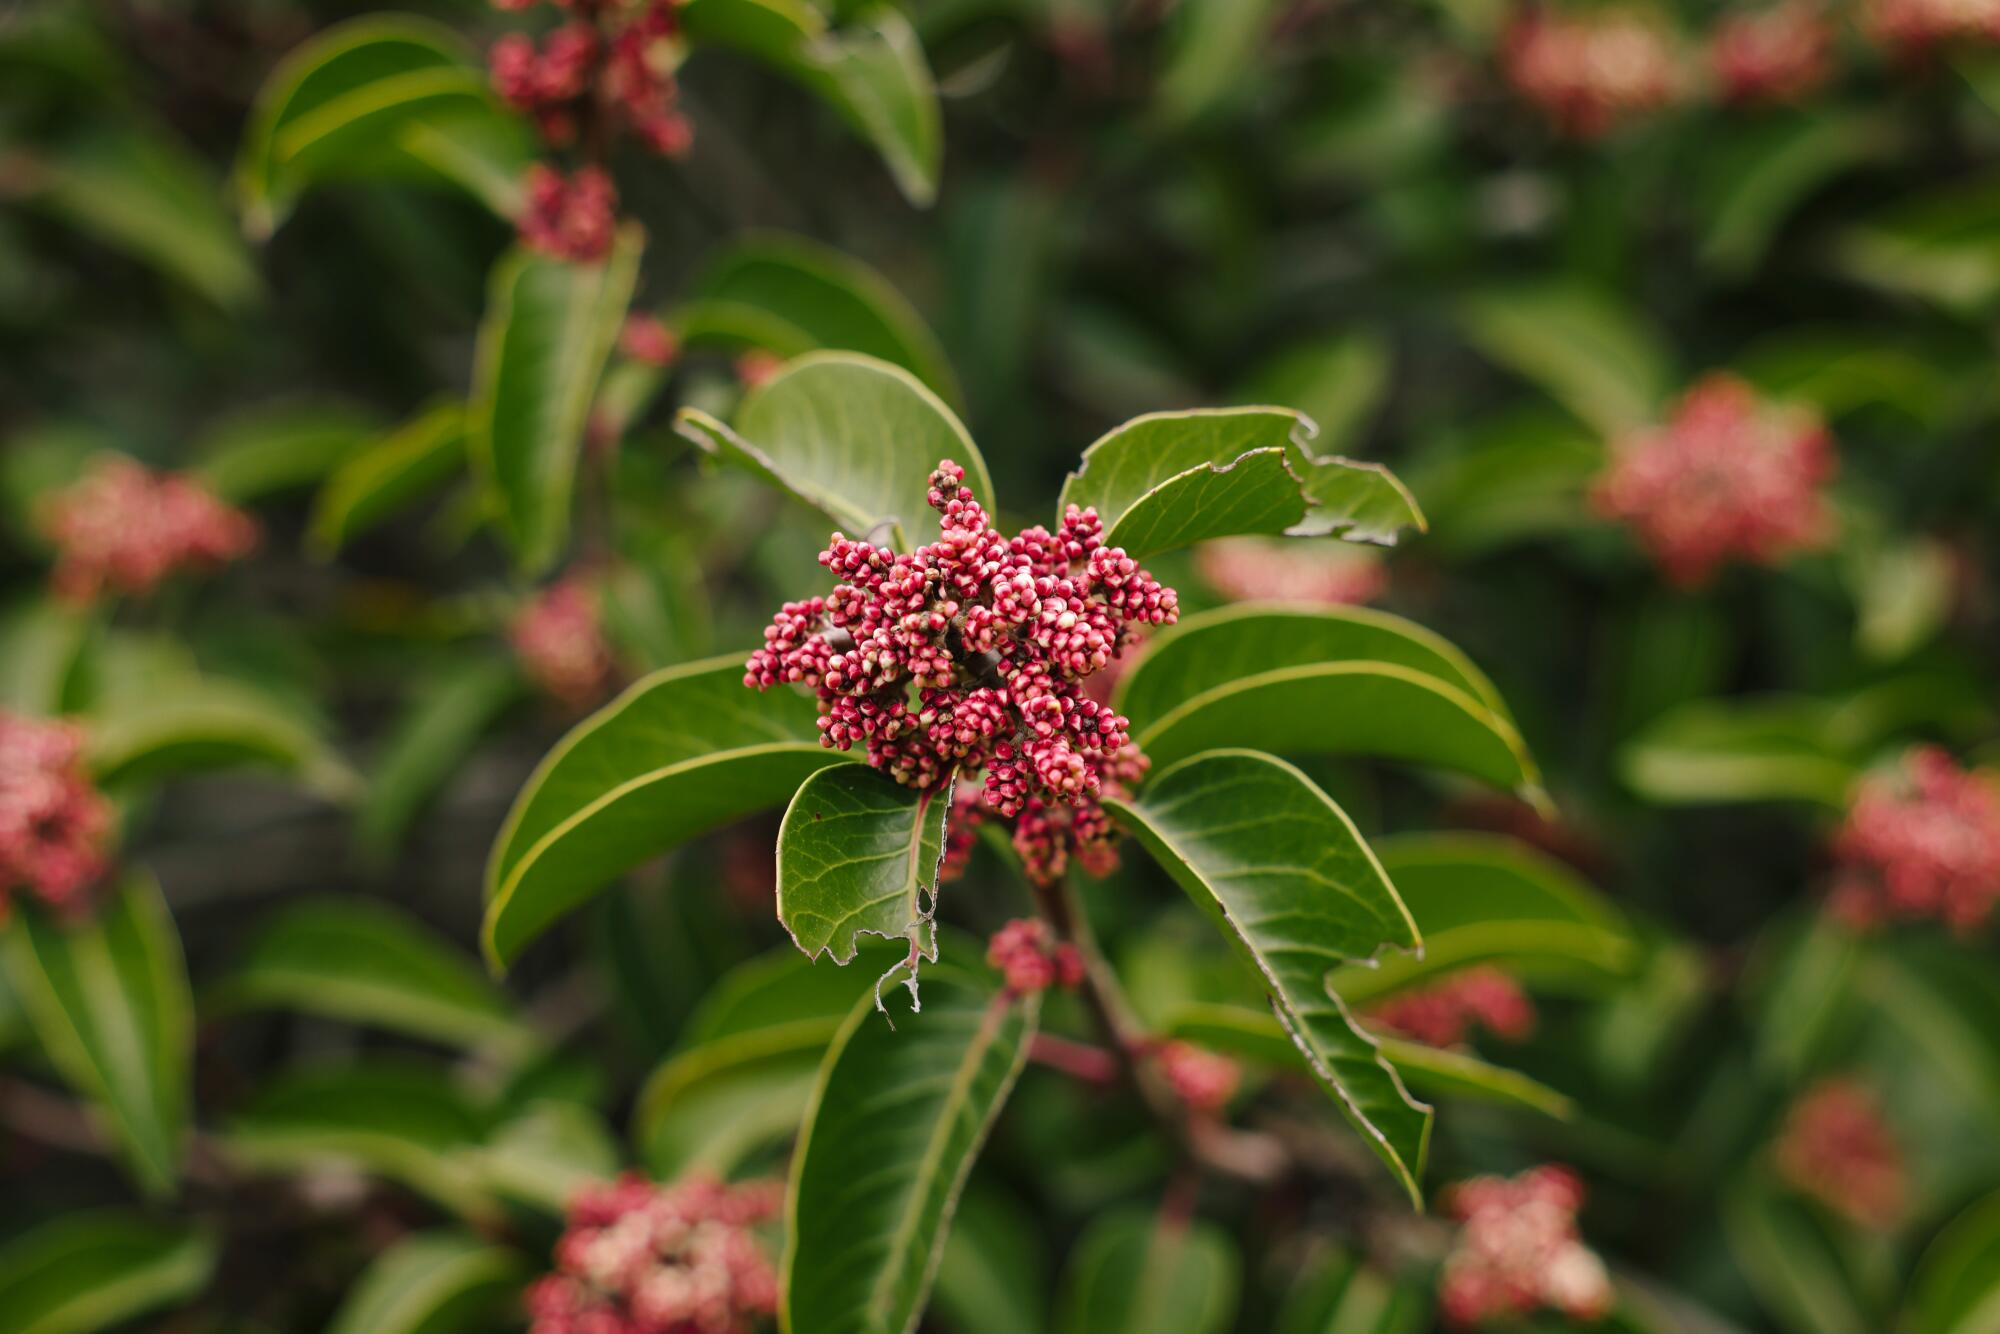 A closeup of a sugar bush bloom, with reddish flowers dotted with white against large leathery deep-green leaves.